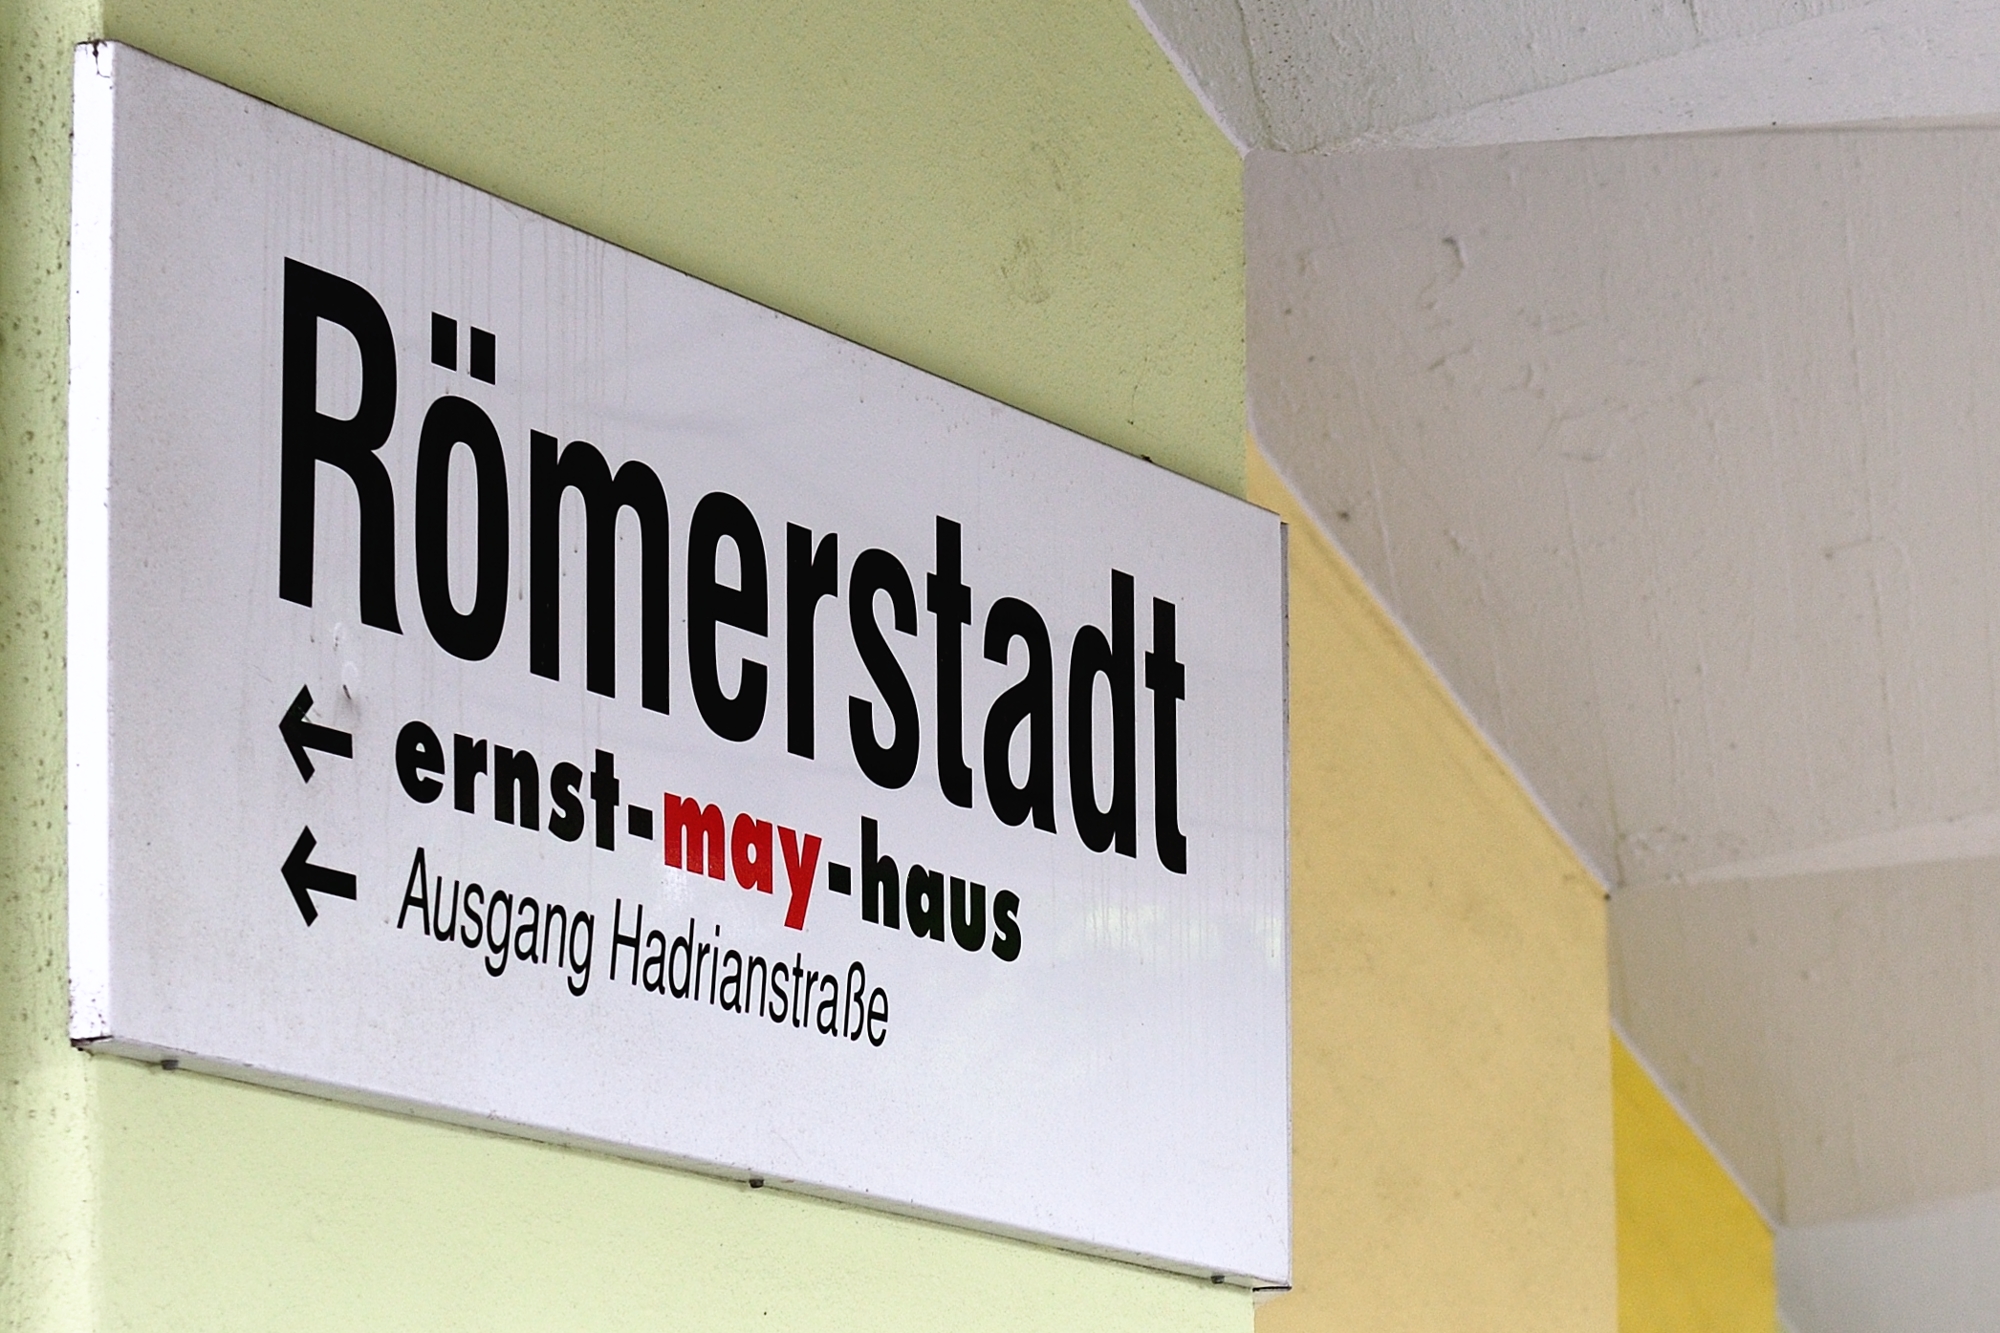 Signs to ernst-may-haus